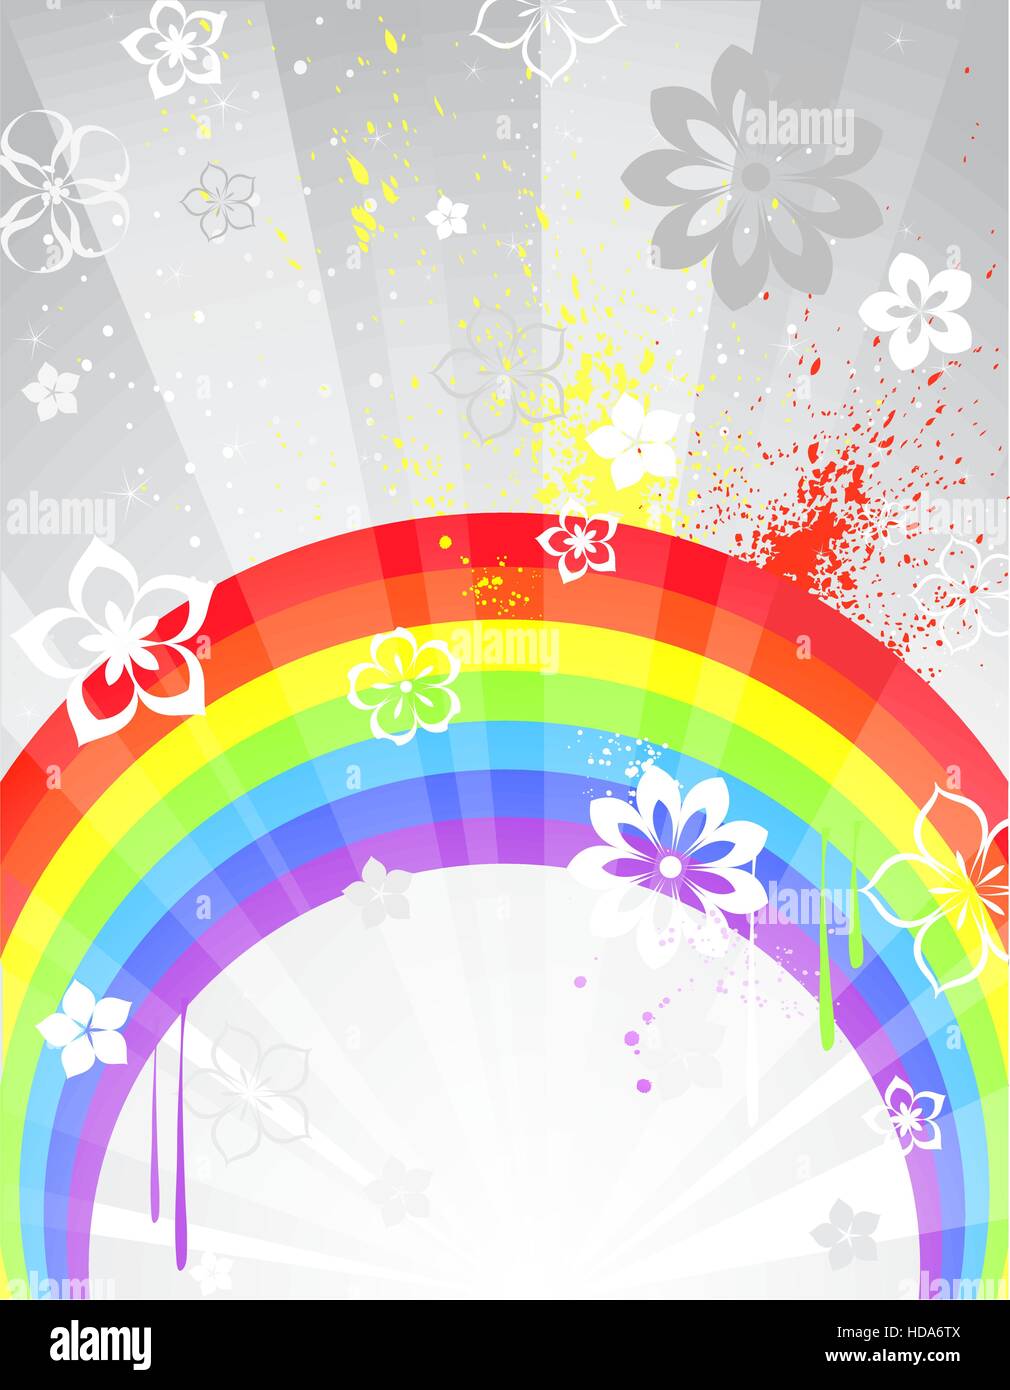 gray shiny, radiant with bright rainbow background and white stylized flowers. Stock Vector